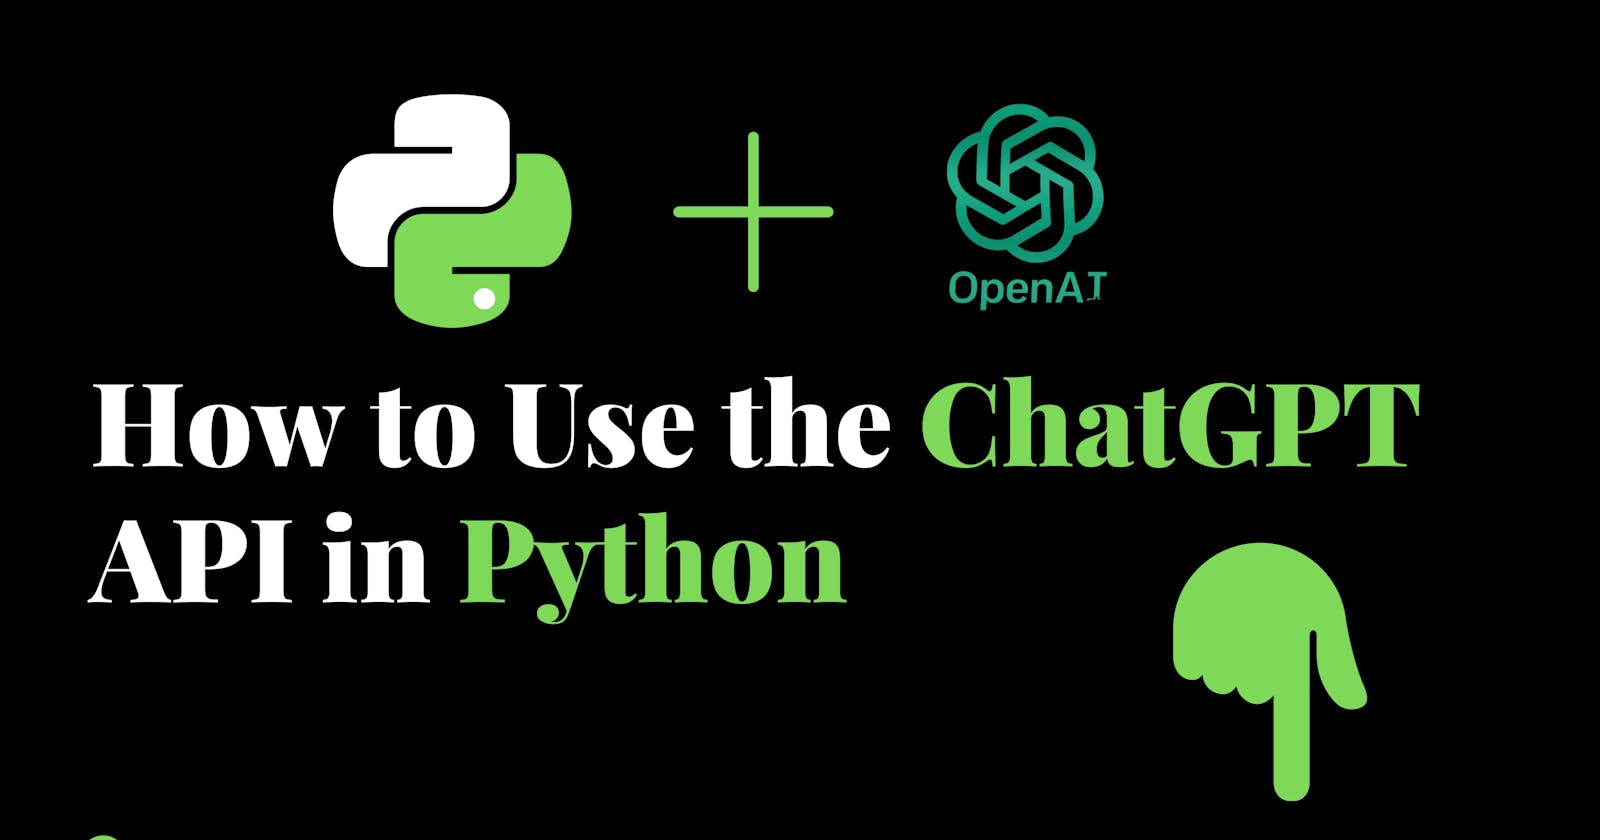 How to Use the ChatGPT API in Python: A Step-by-Step Guide